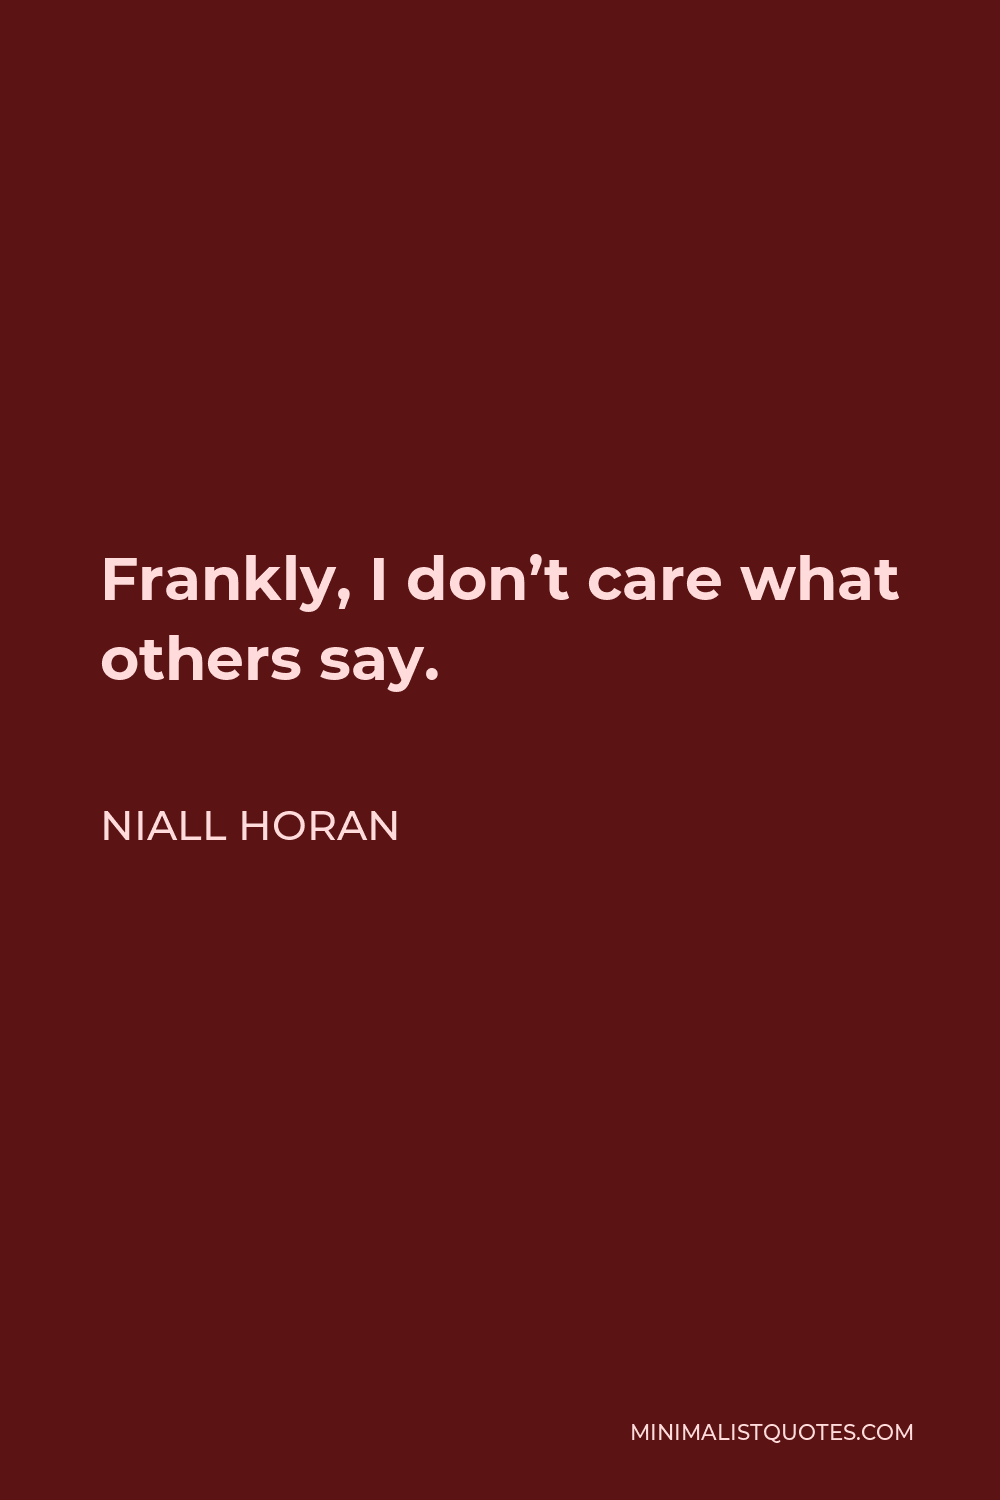 Niall Horan Quote - Frankly, I don’t care what others say.